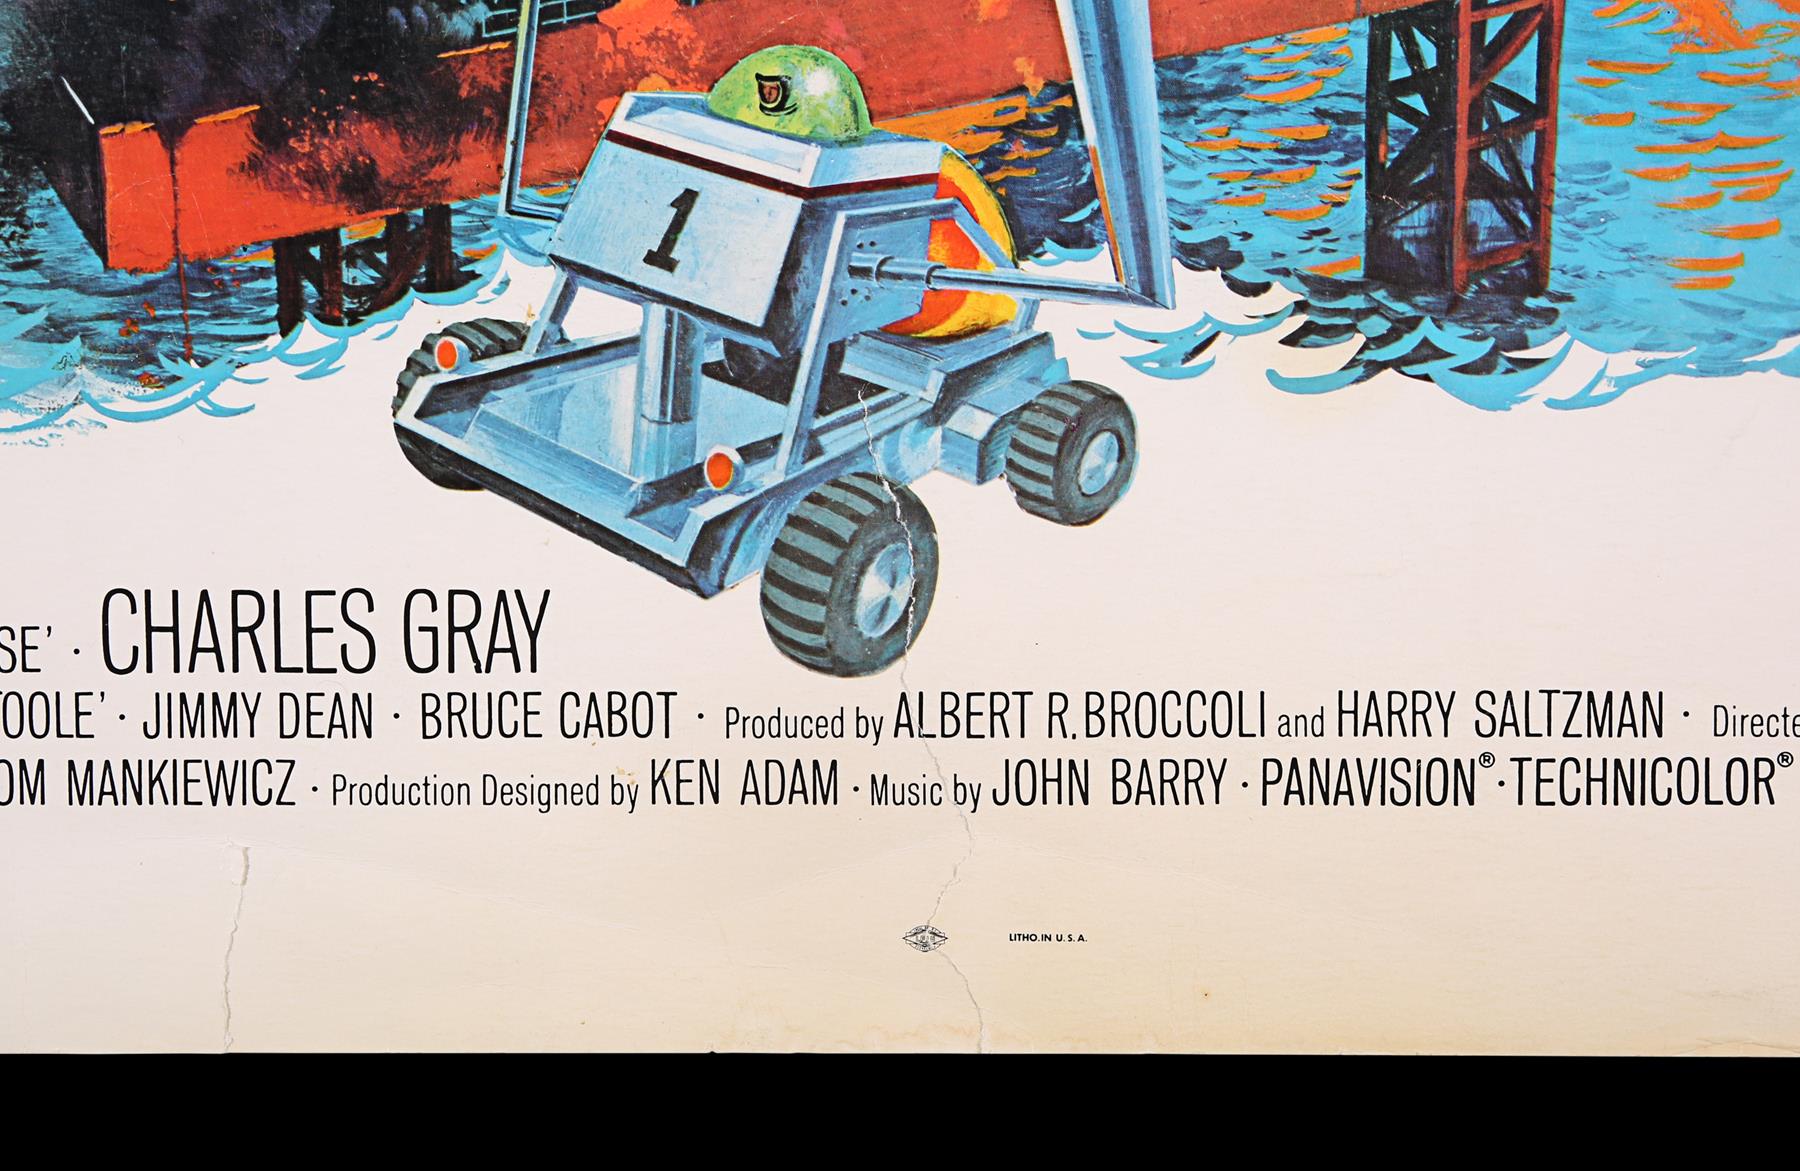 DIAMONDS ARE FOREVER (1971) - US 30x40 Poster, 1971 - Image 5 of 7